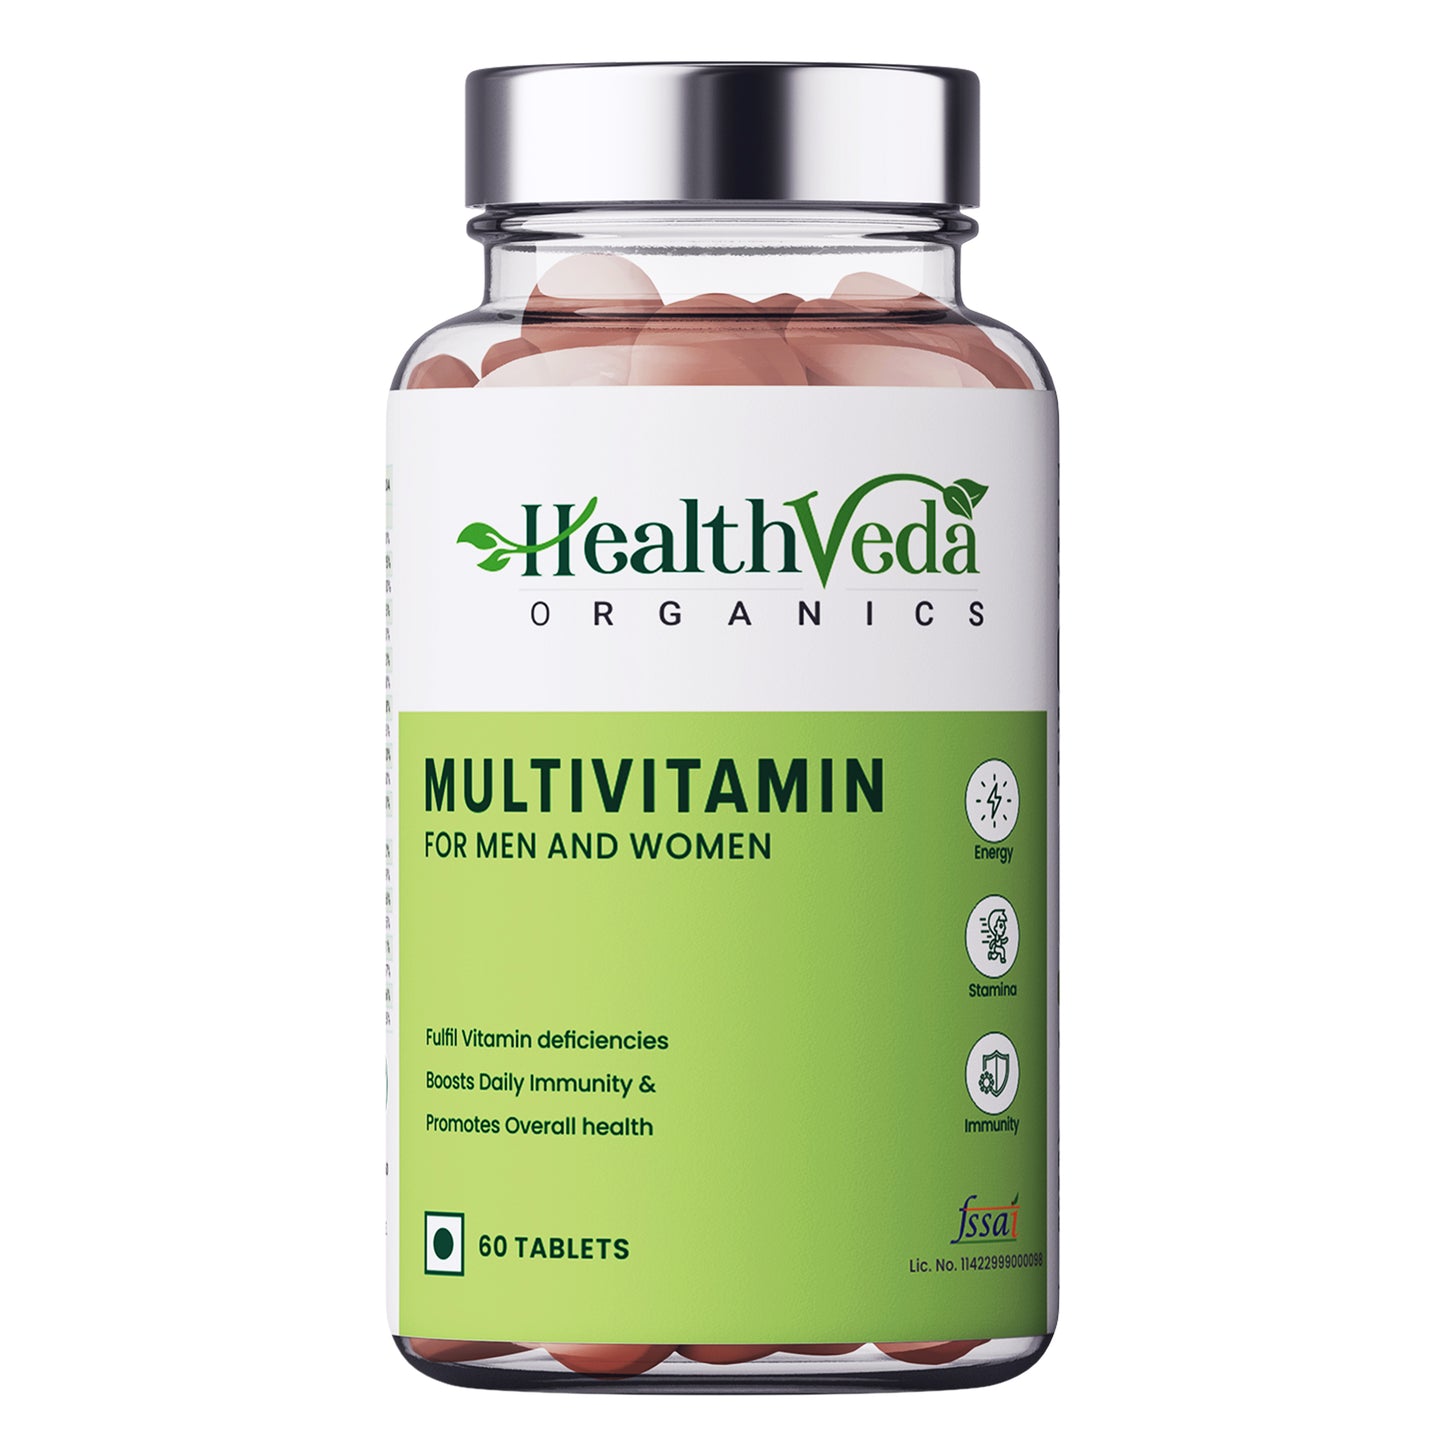 Health Veda Organics Multivitamin for Men and Women with Zinc, Vitamin C, Vitamin D3, Multiminerals & Ginseng Extract | 60 Veg Tablets